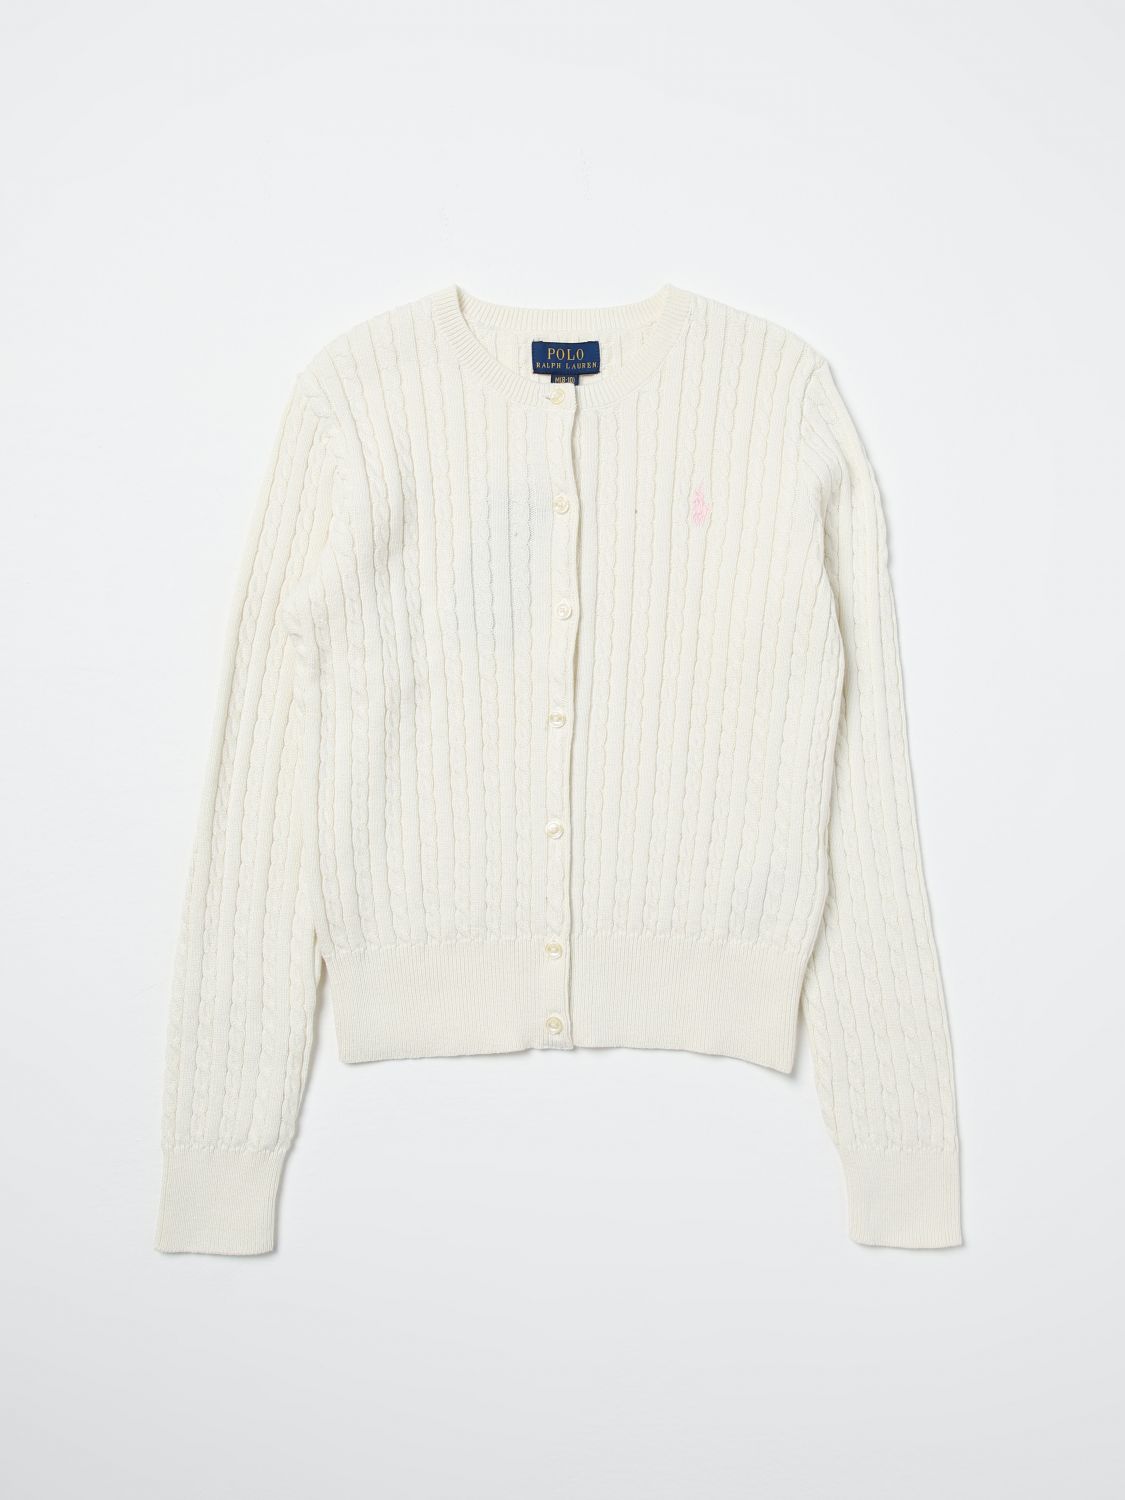 POLO RALPH LAUREN: Sweater kids - Ivory | Polo Ralph Lauren sweater  313543047012 online at GIGLIO.COM